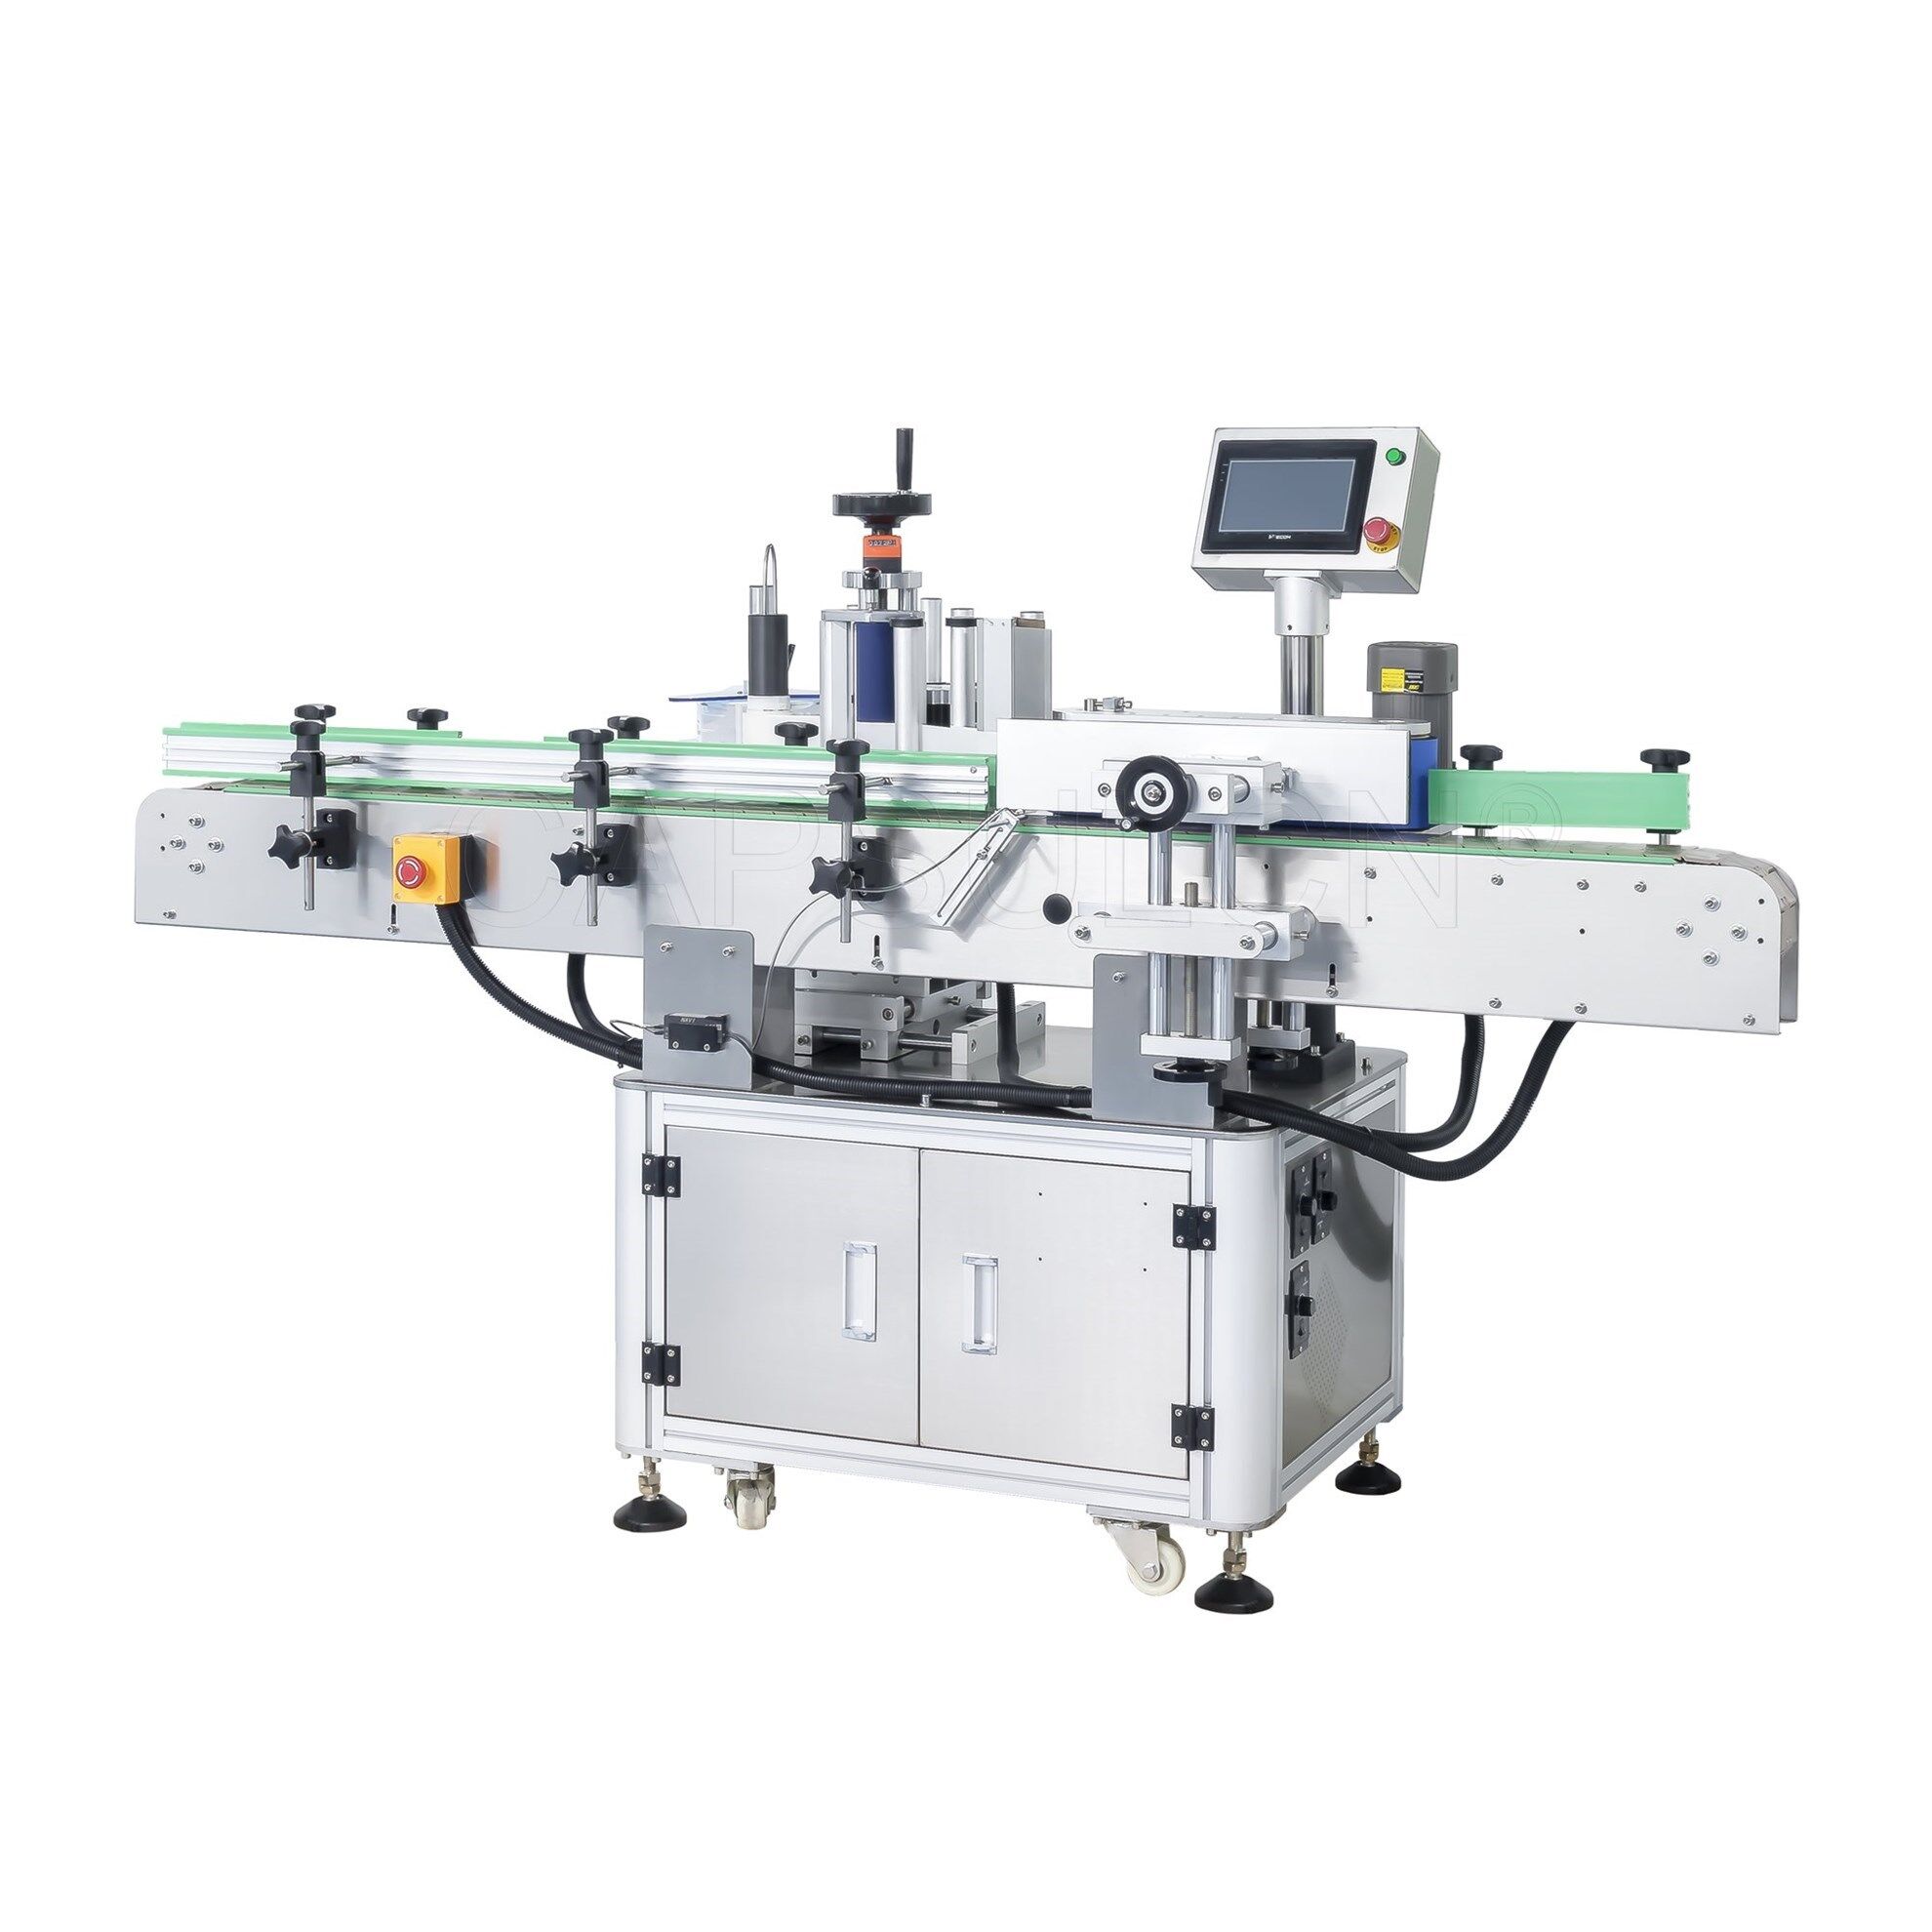 WINSKYS ST520-F Automatic Tabletop Flat Surface Label Applicator Machine  for Card Bag